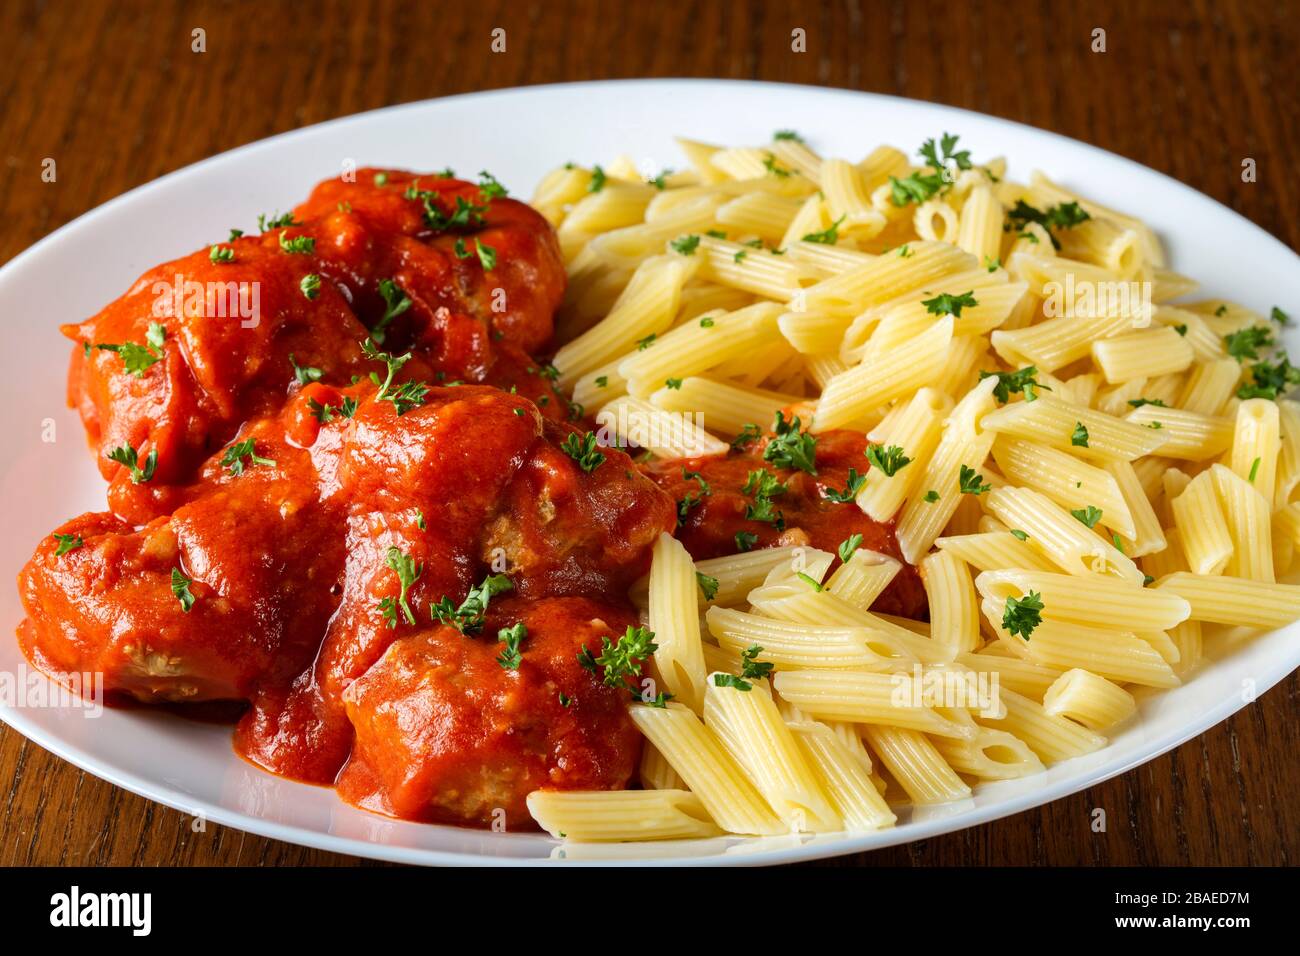 Meatballs in tomato sauce with small penne pasta on plate Stock Photo